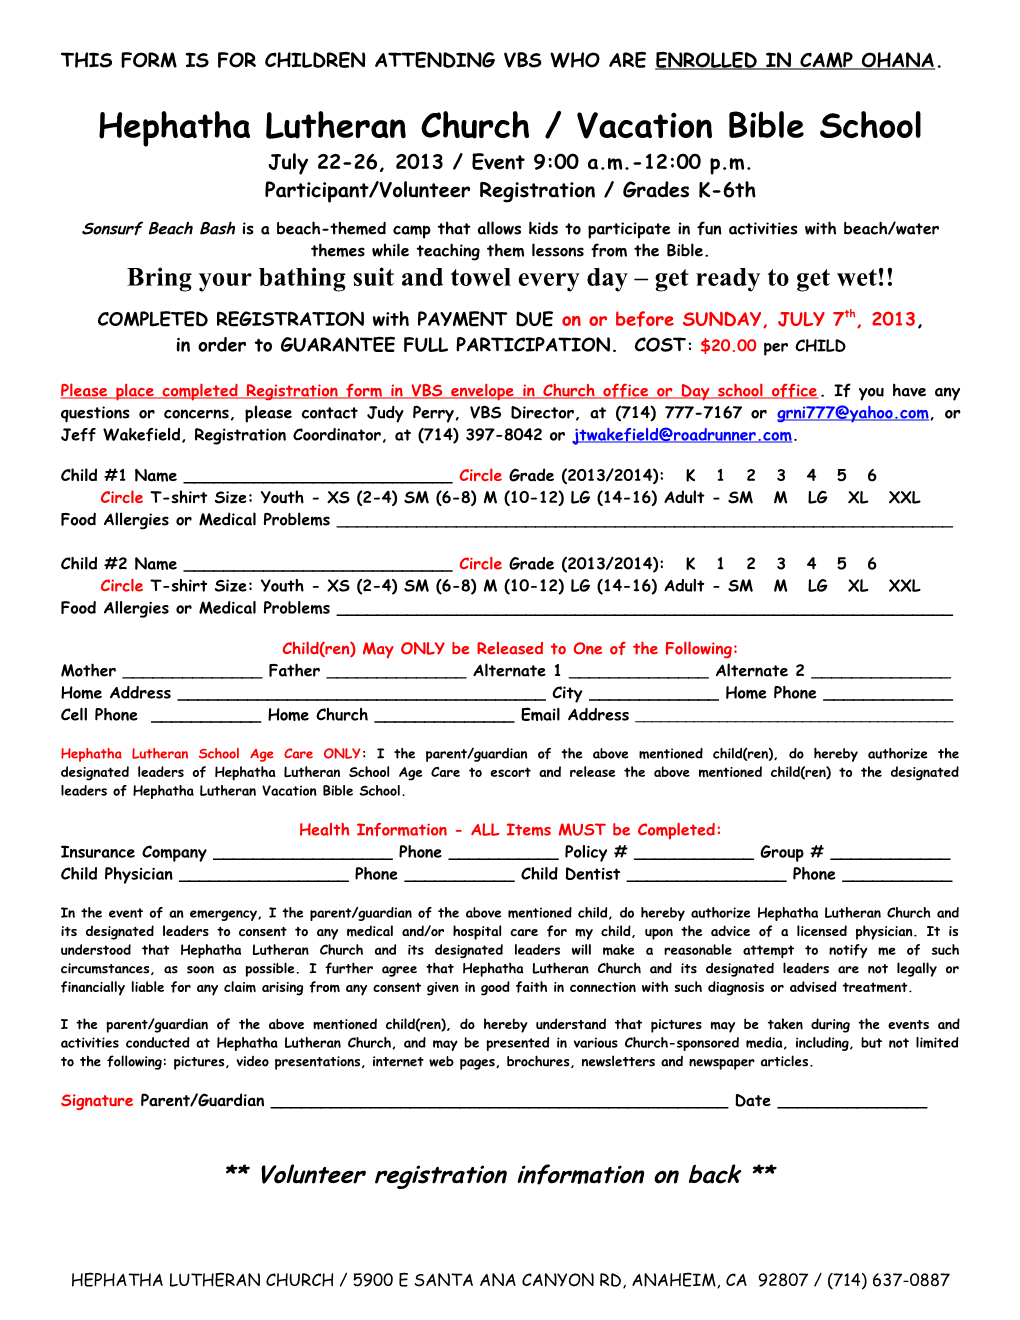 This Form Is for Children Attending Vbs Who Are Enrolled in Camp Ohana